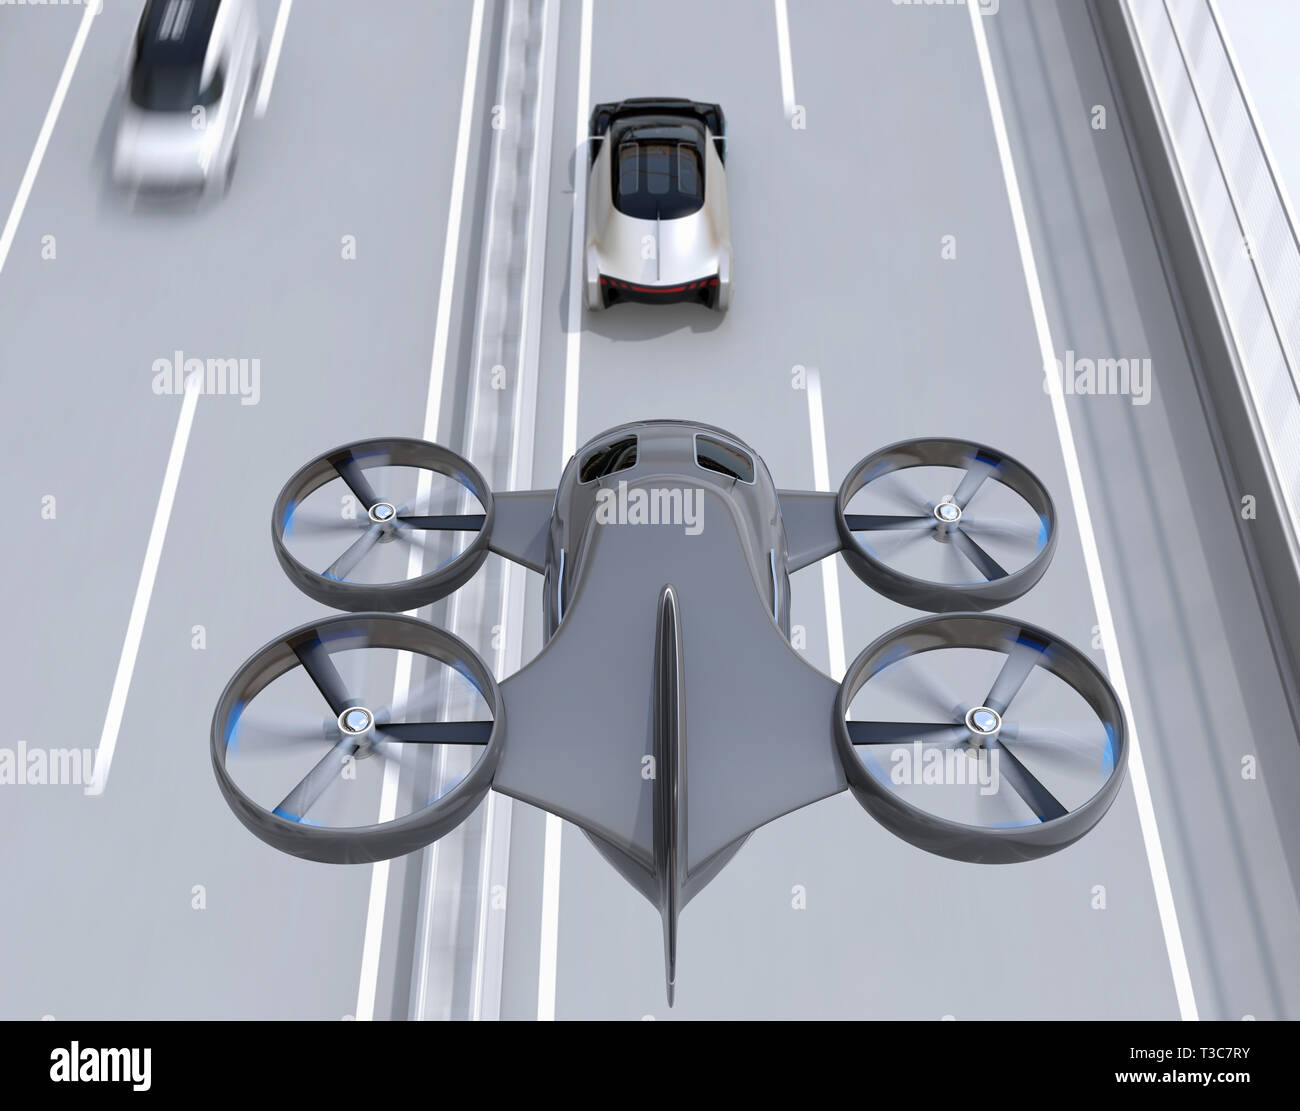 Self-driving Passenger Drone Taxi flying over an autonomous electric car driving on the highway. MaaS concept. 3D rendering image. Stock Photo